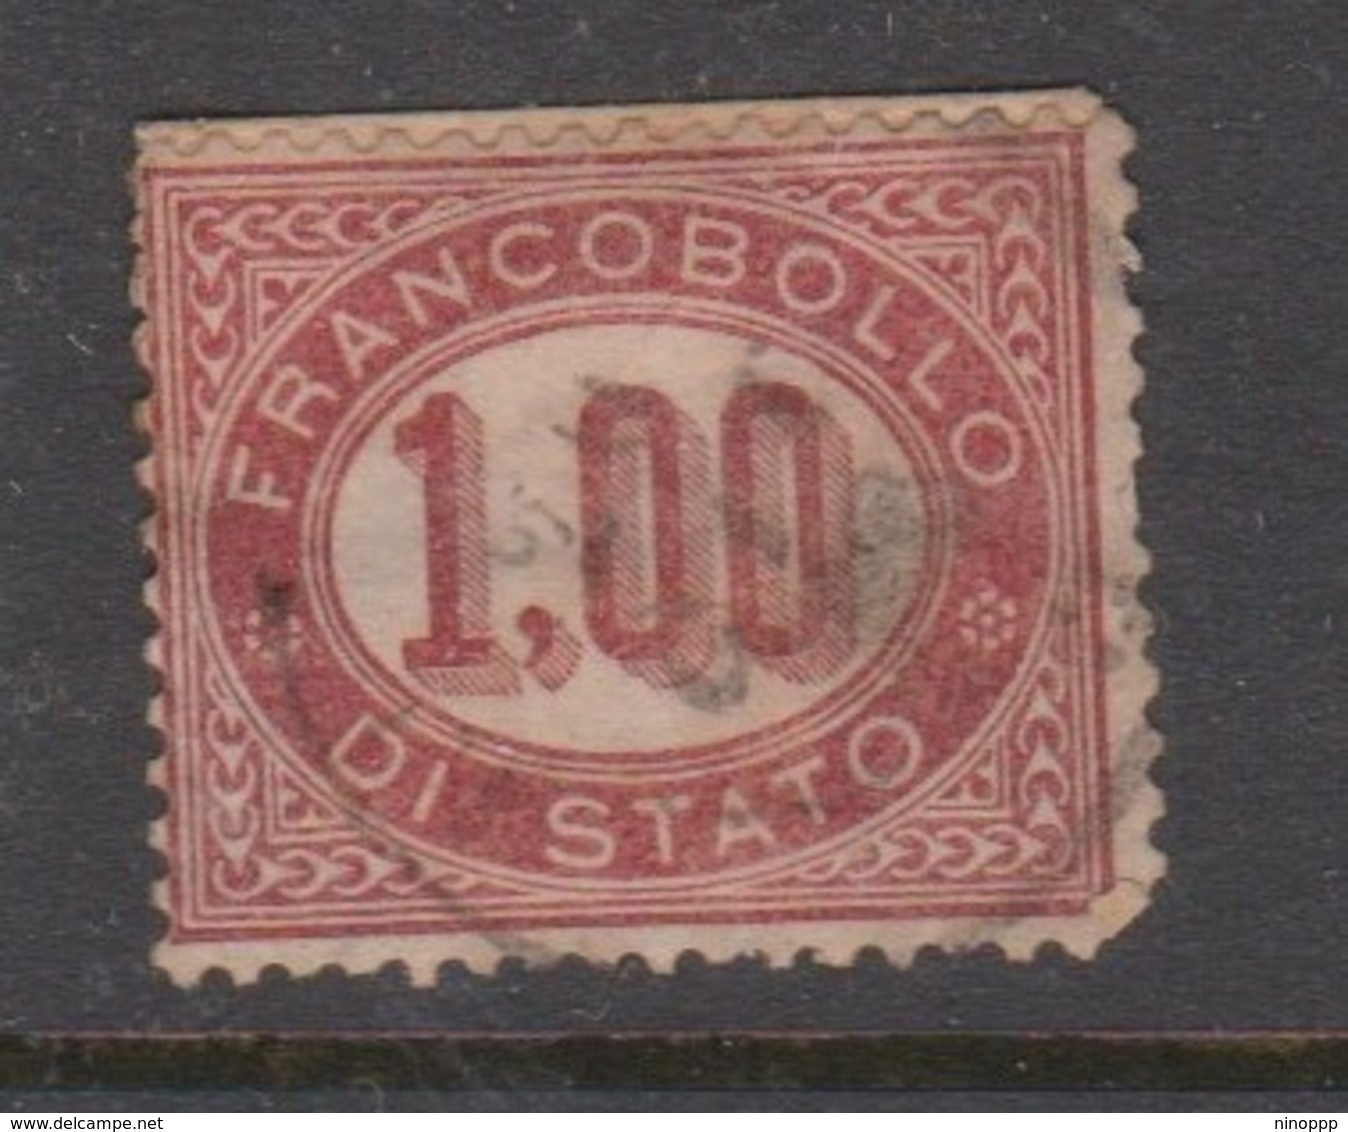 Italy O 5 1875 Official Stamp,lire 1 Lake,used - Dienstmarken